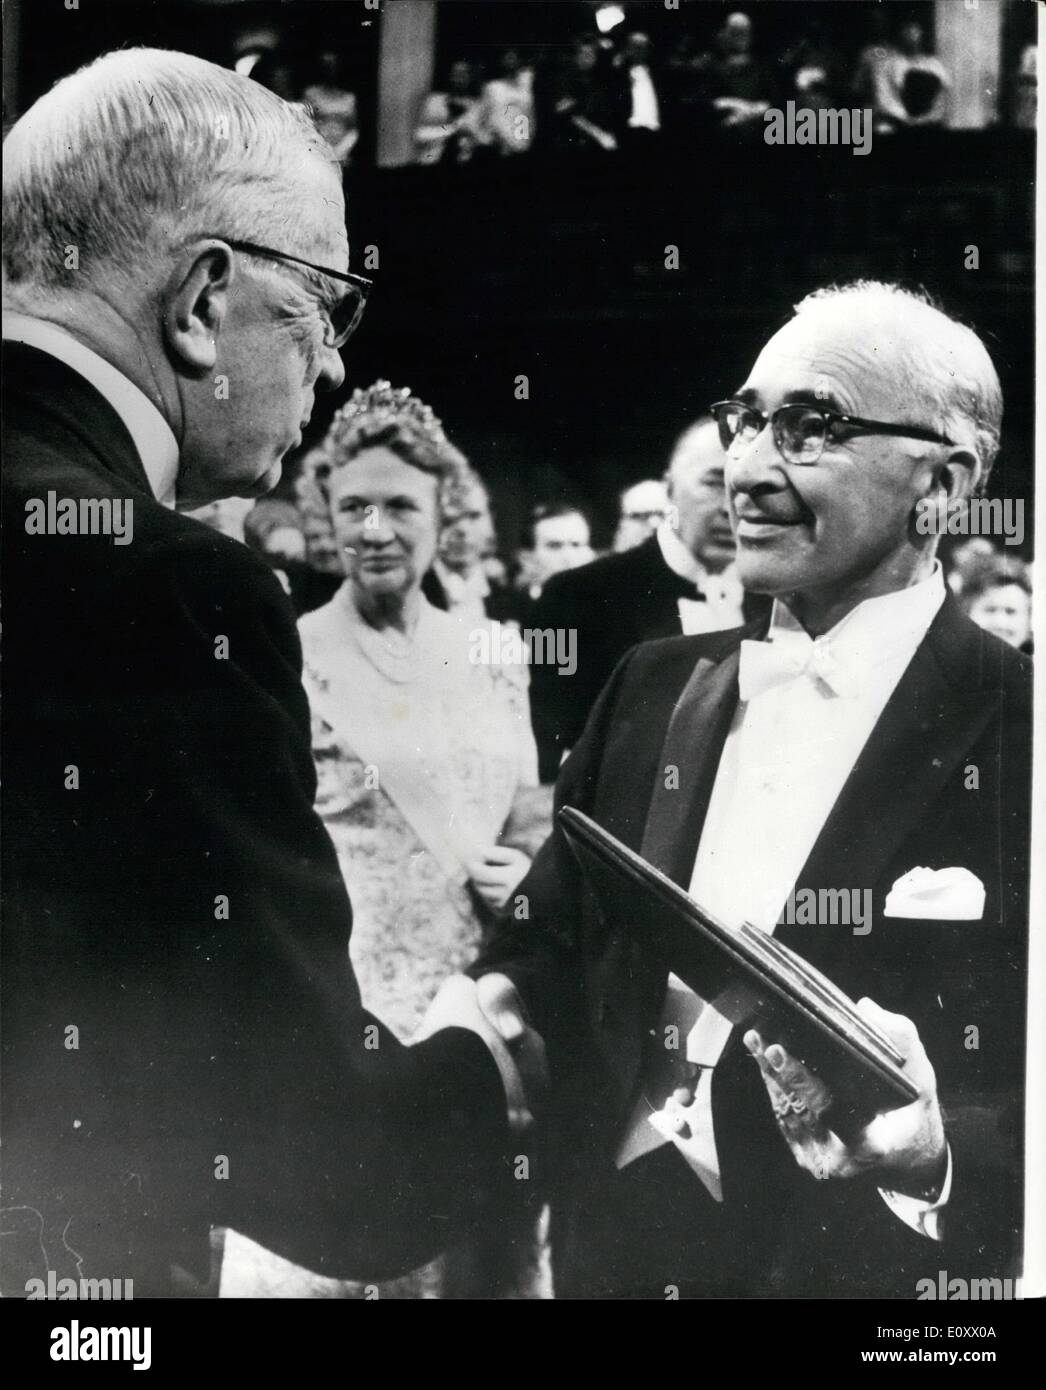 Dec. 12, 1967 - Noble Prize Award In Stockholm: At a ceremony in the Concert Hall, Stockholm on Sunday (Dec 10), King Gustav Adolf of Sweden presented this year's Nobel Prizes. The ceremony was held on the 71st. anniversary of the death of Alfred Nobel, the inventor and industrialist. Phot Shows Prof. George Wald. (U.S.A.), joint winner of the prize for medicine, receiving the prize from King Gustav Adolf of Sweden. Stock Photo